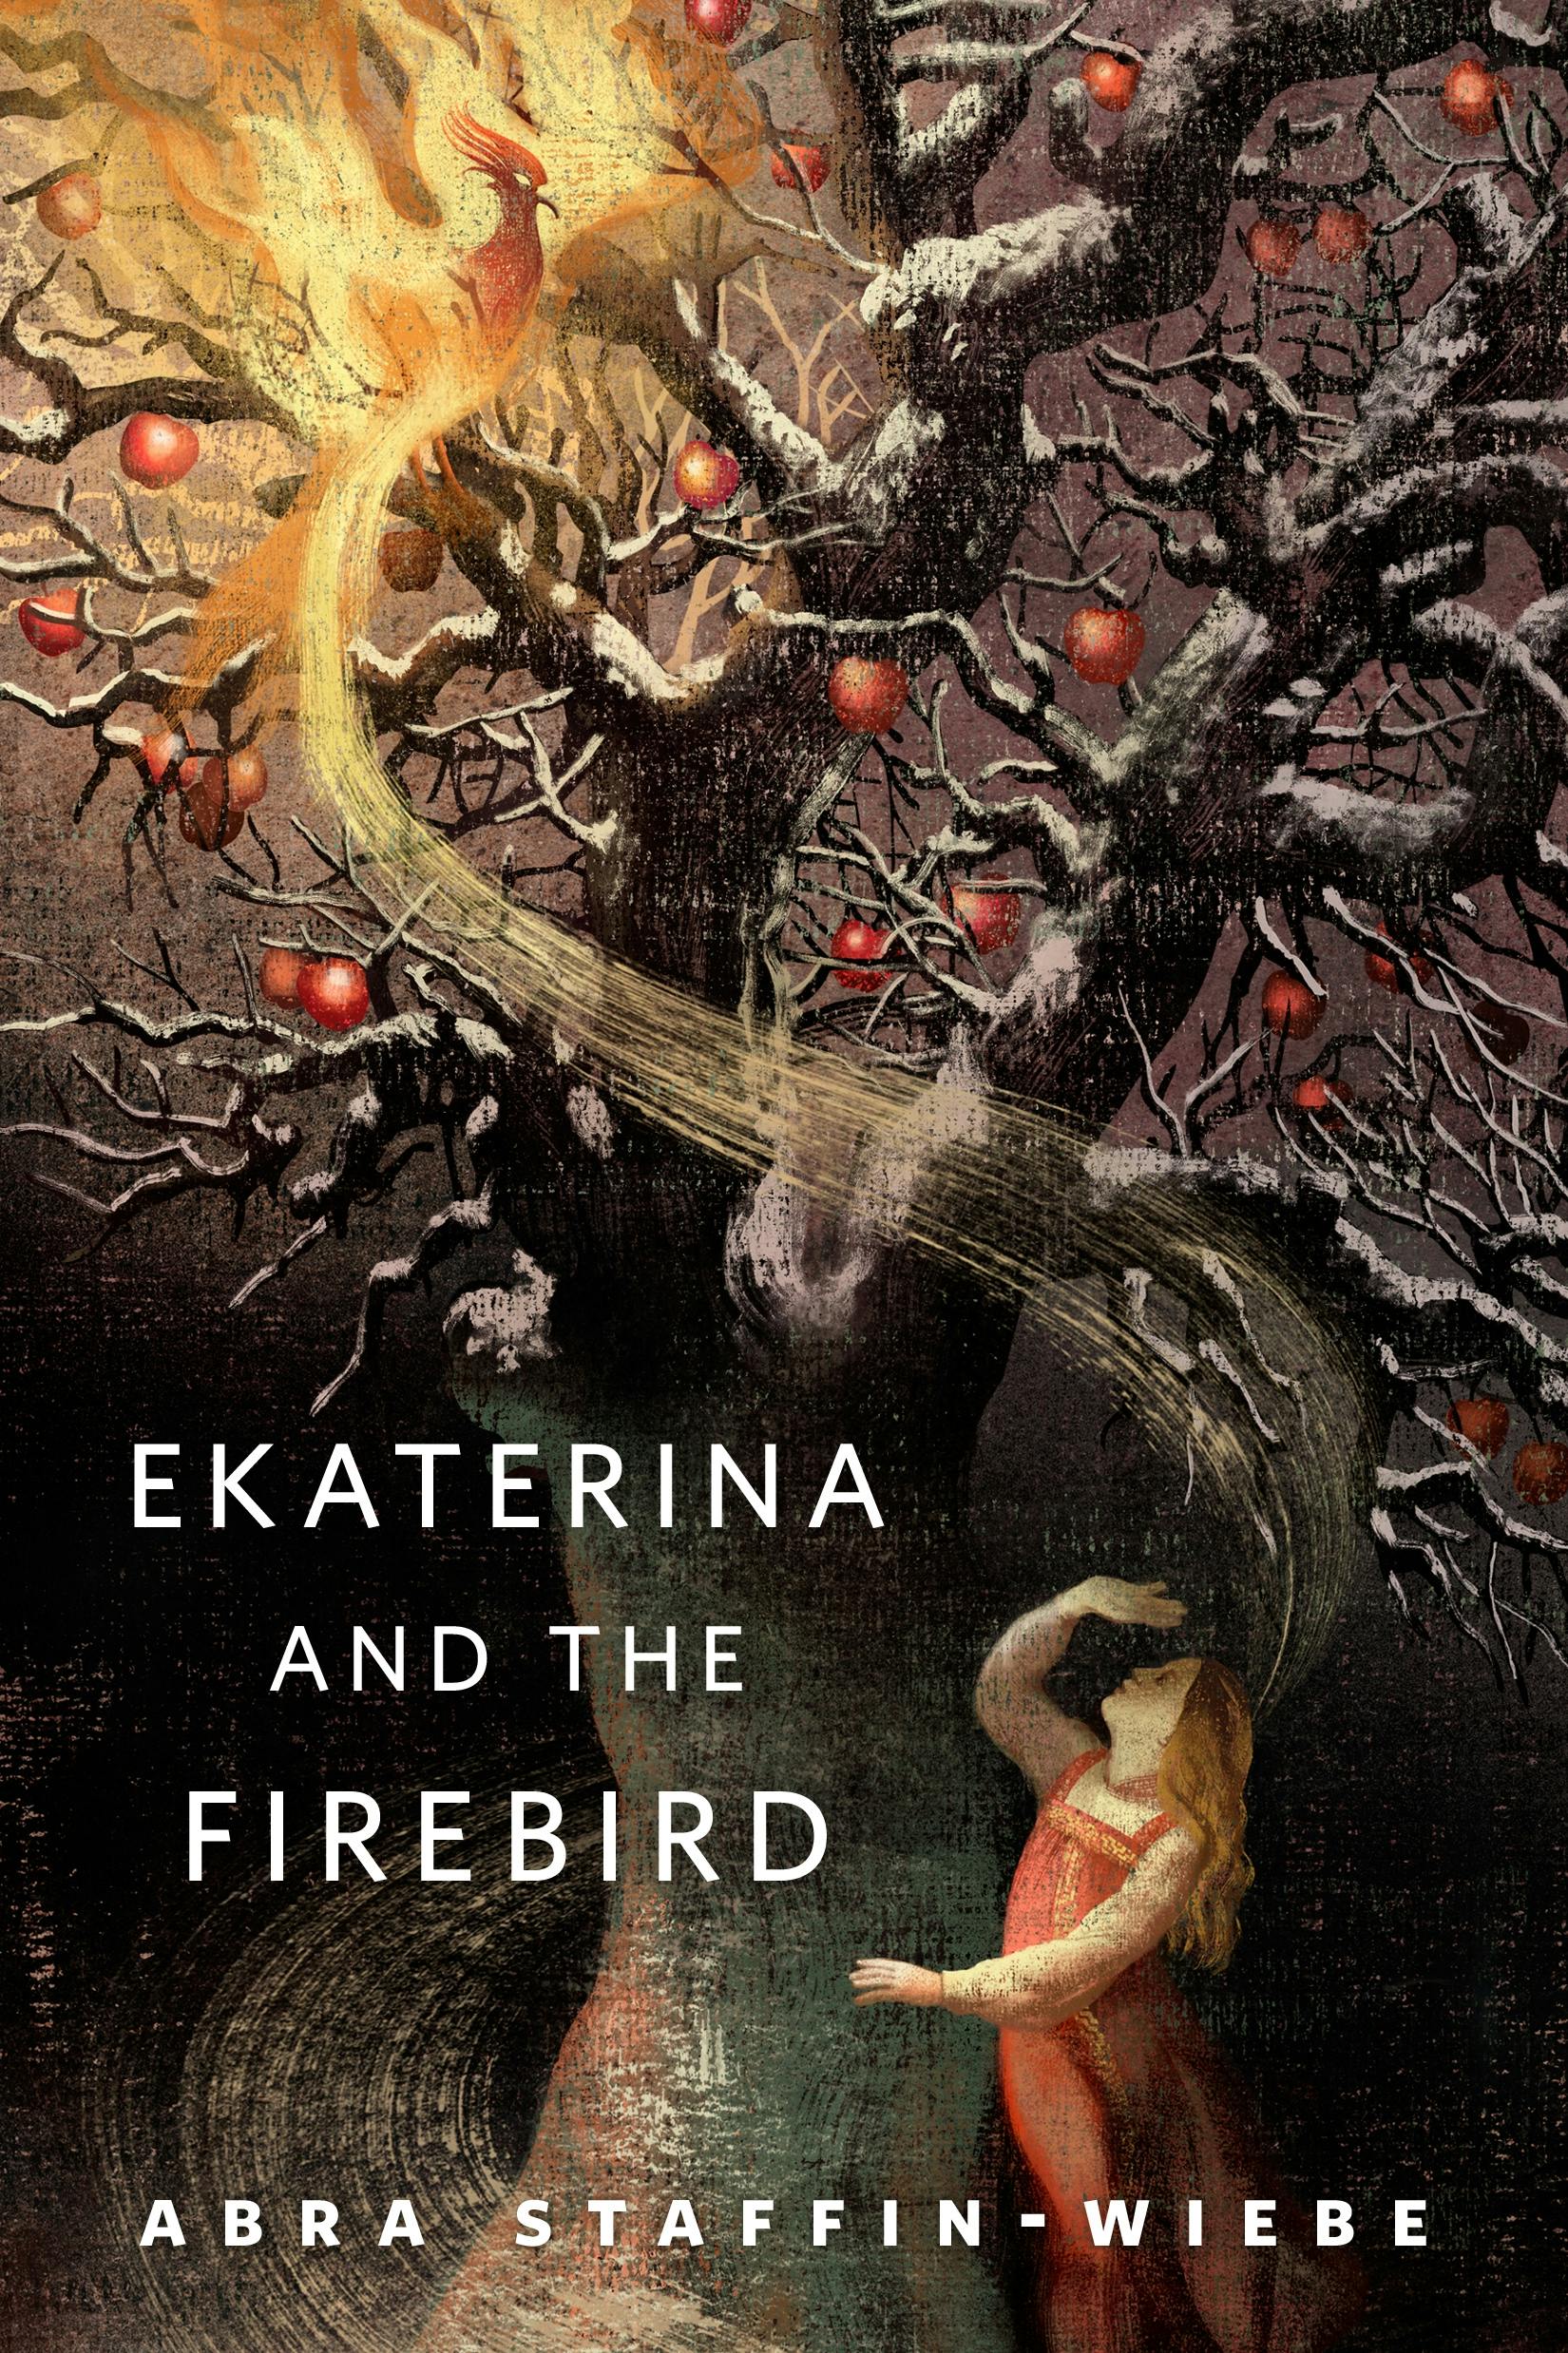 Image of Ekaterina and the Firebird